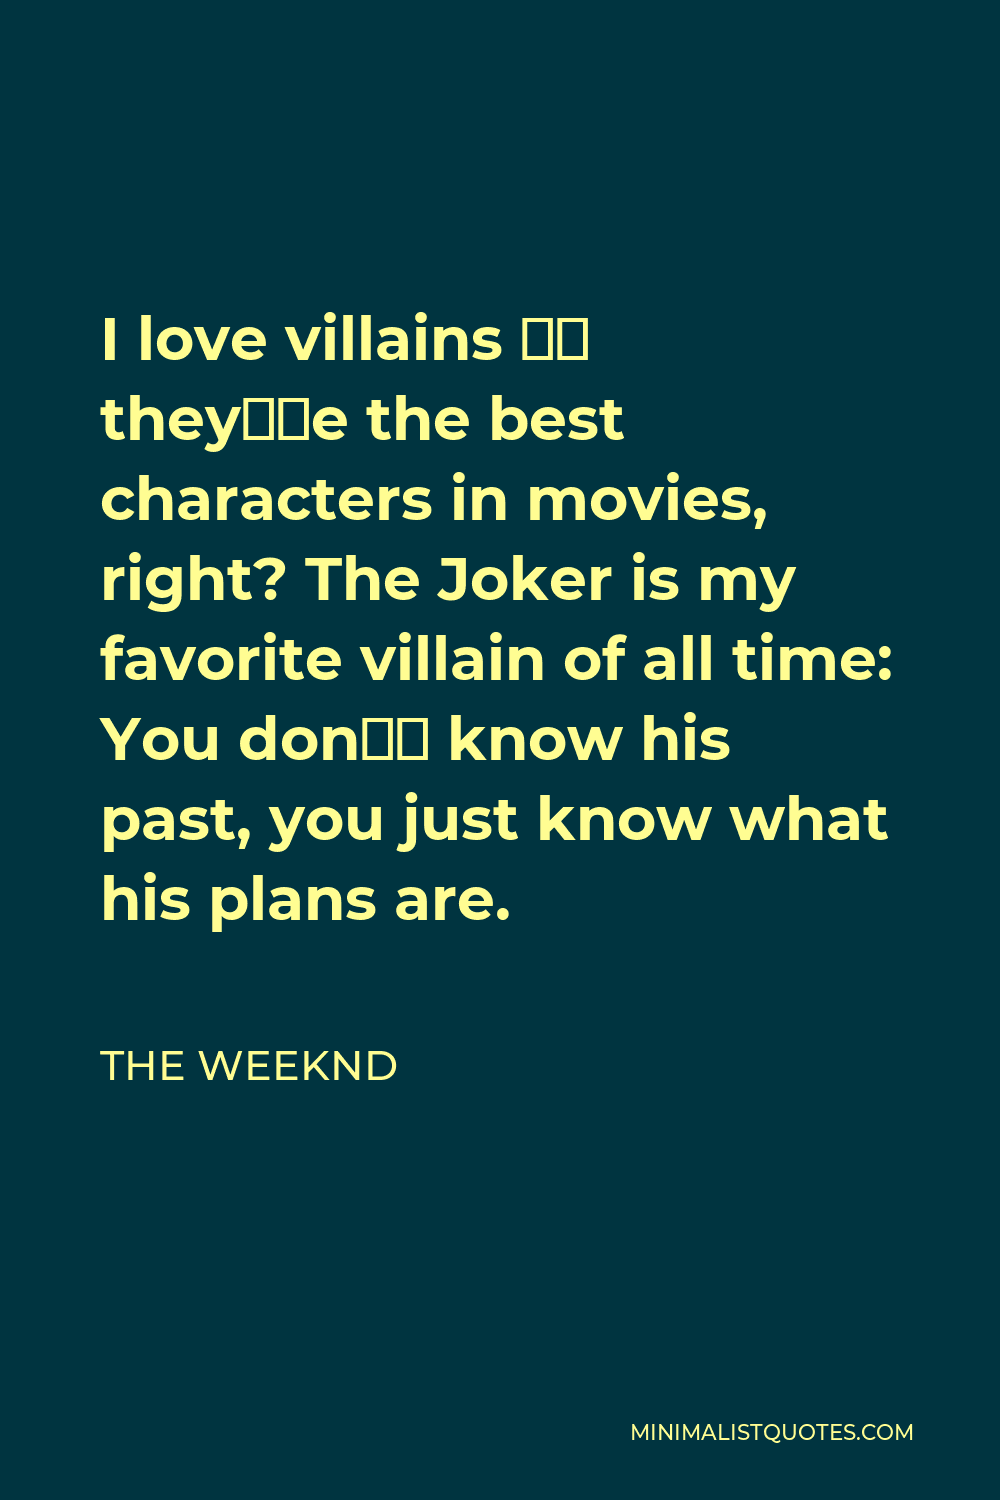 The Weeknd Quote - I love villains – they’re the best characters in movies, right? The Joker is my favorite villain of all time: You don’t know his past, you just know what his plans are.